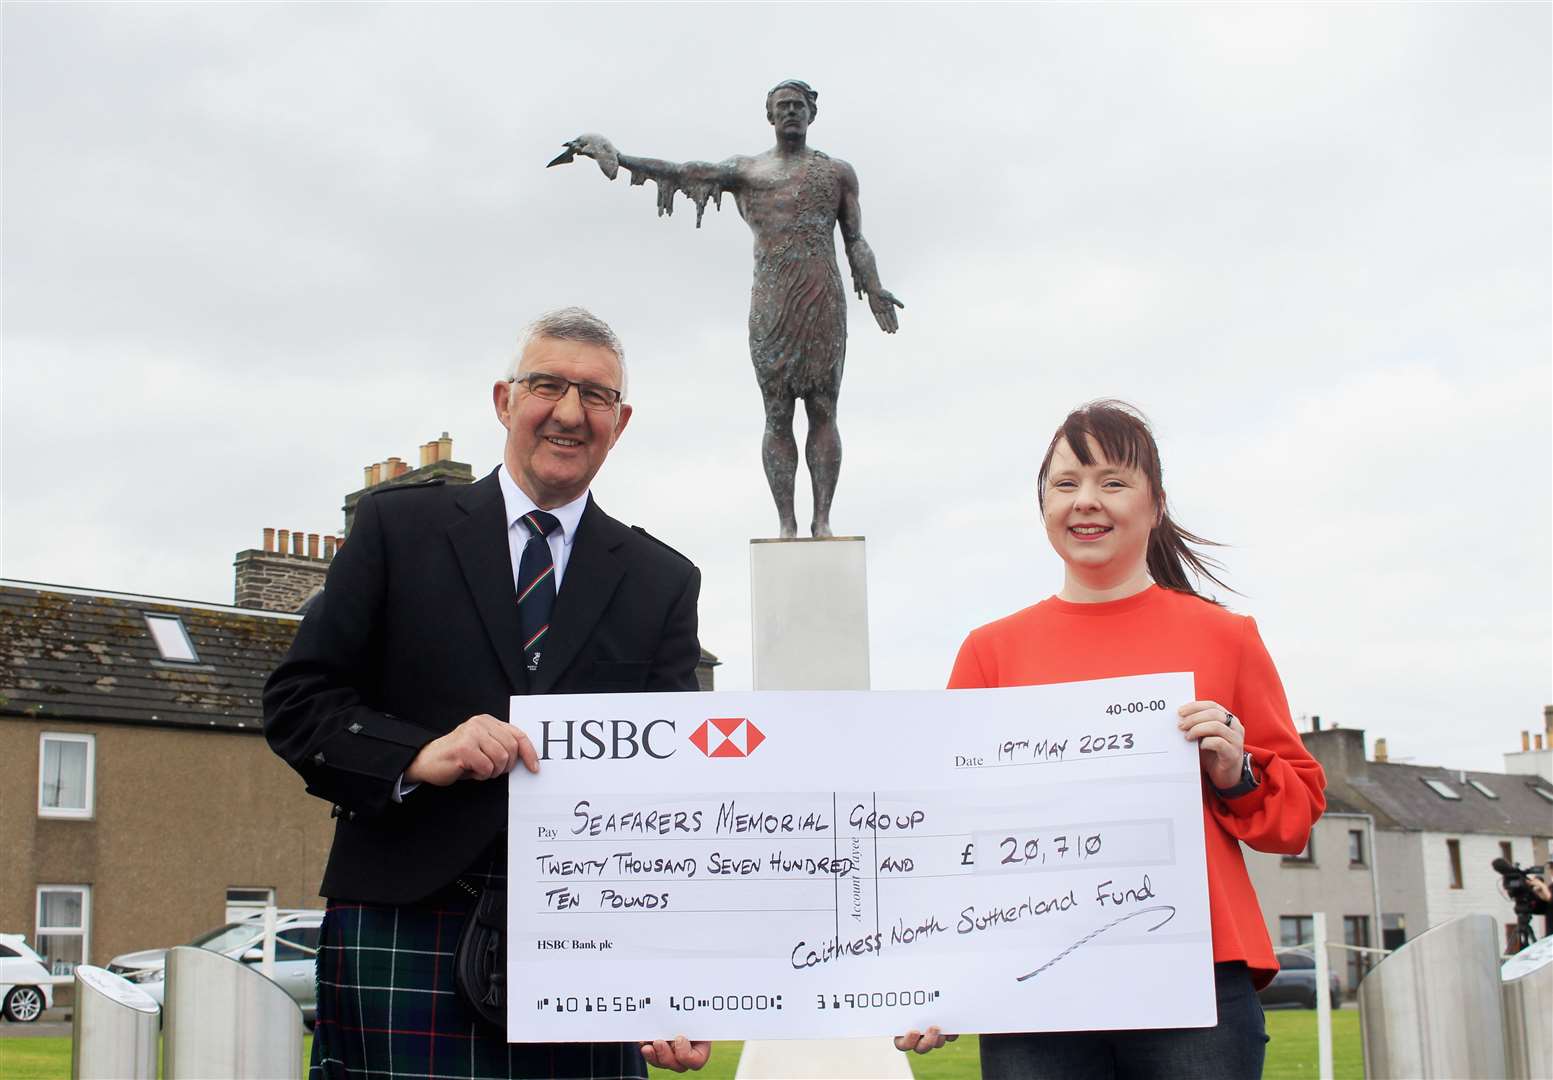 Willie Watt, chairman of the Seafarers Memorial Group, accepts a cheque for £20,710 from Kayleigh Nicolson, vice-chairperson of the Caithness and North Sutherland Fund. Picture: Alan Hendry